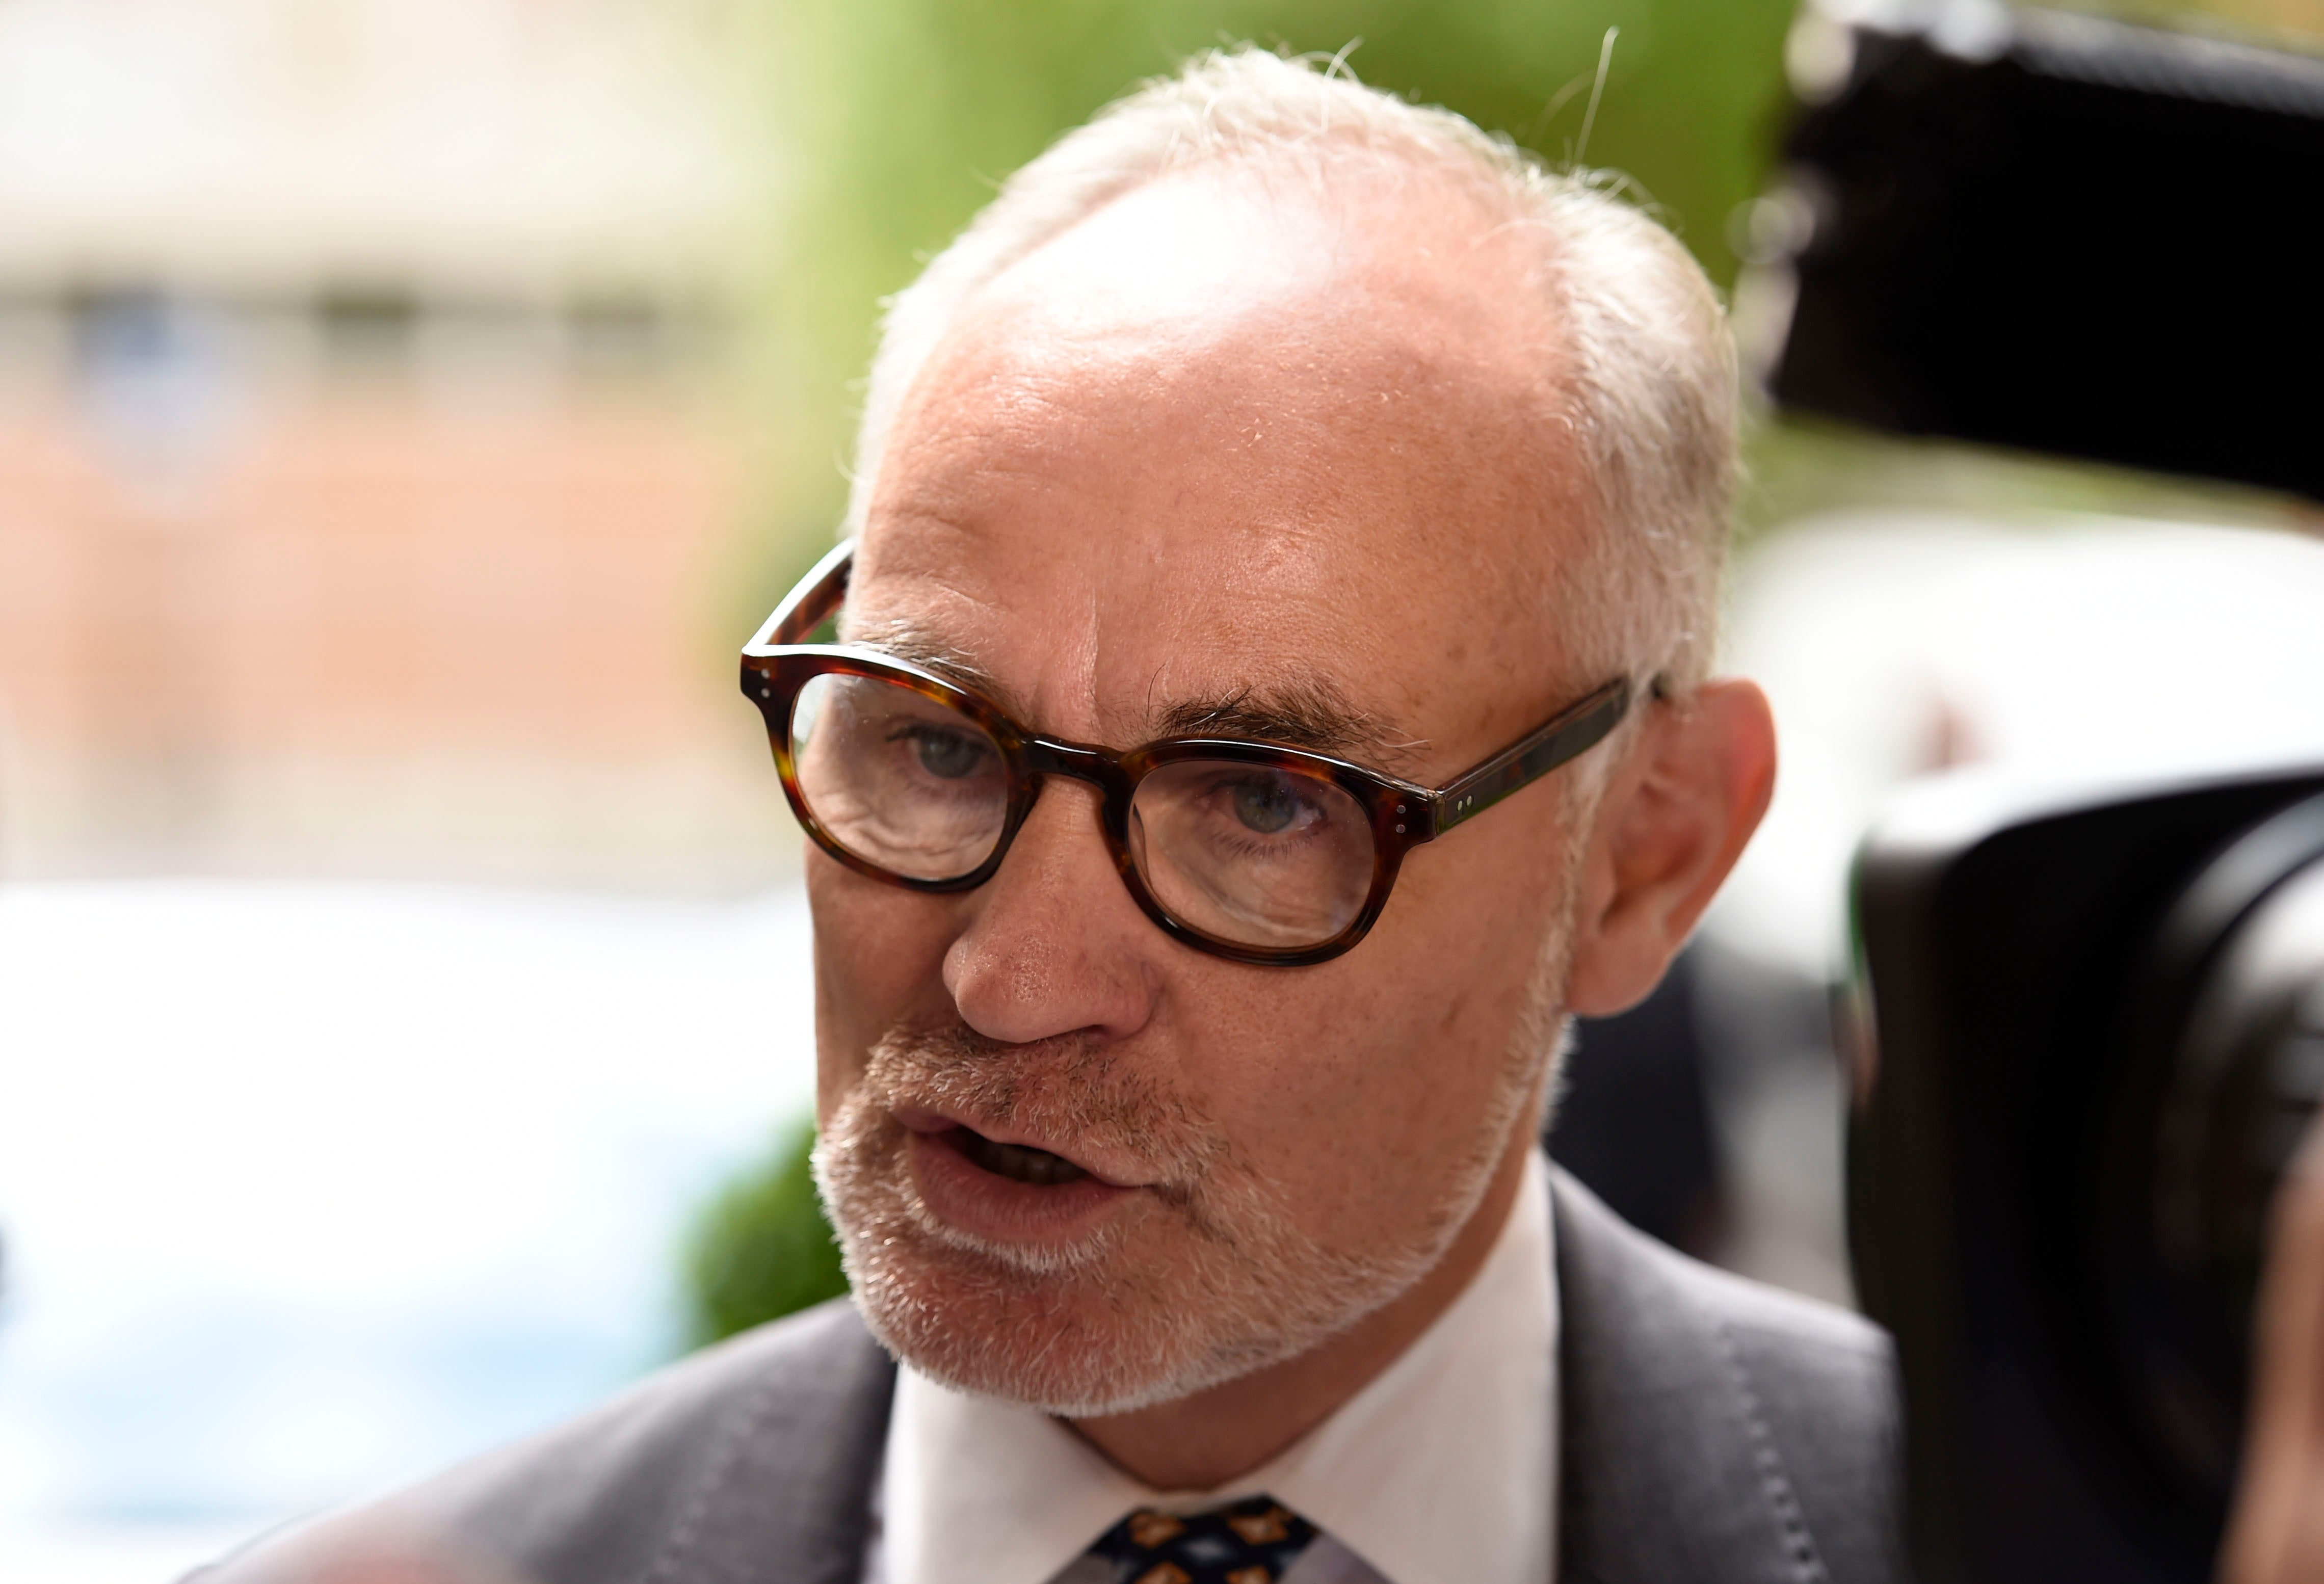 Conservative MP Crispin Blunt has announced he will stand down at the next election